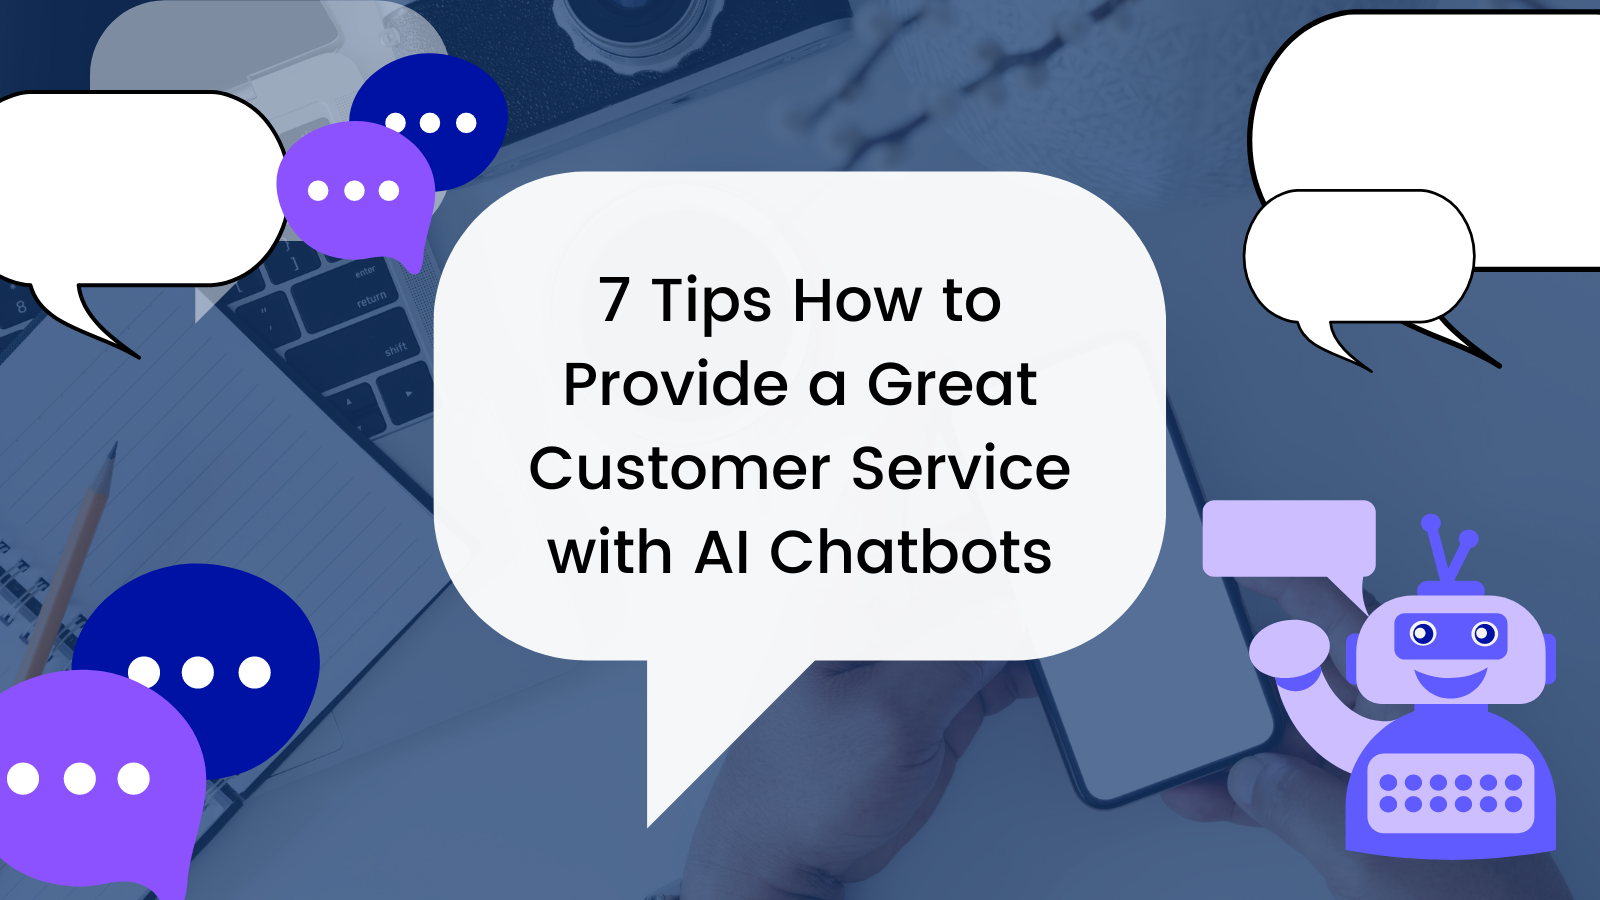 7 Tips How to Provide a Great Customer Service with AI Chatbots